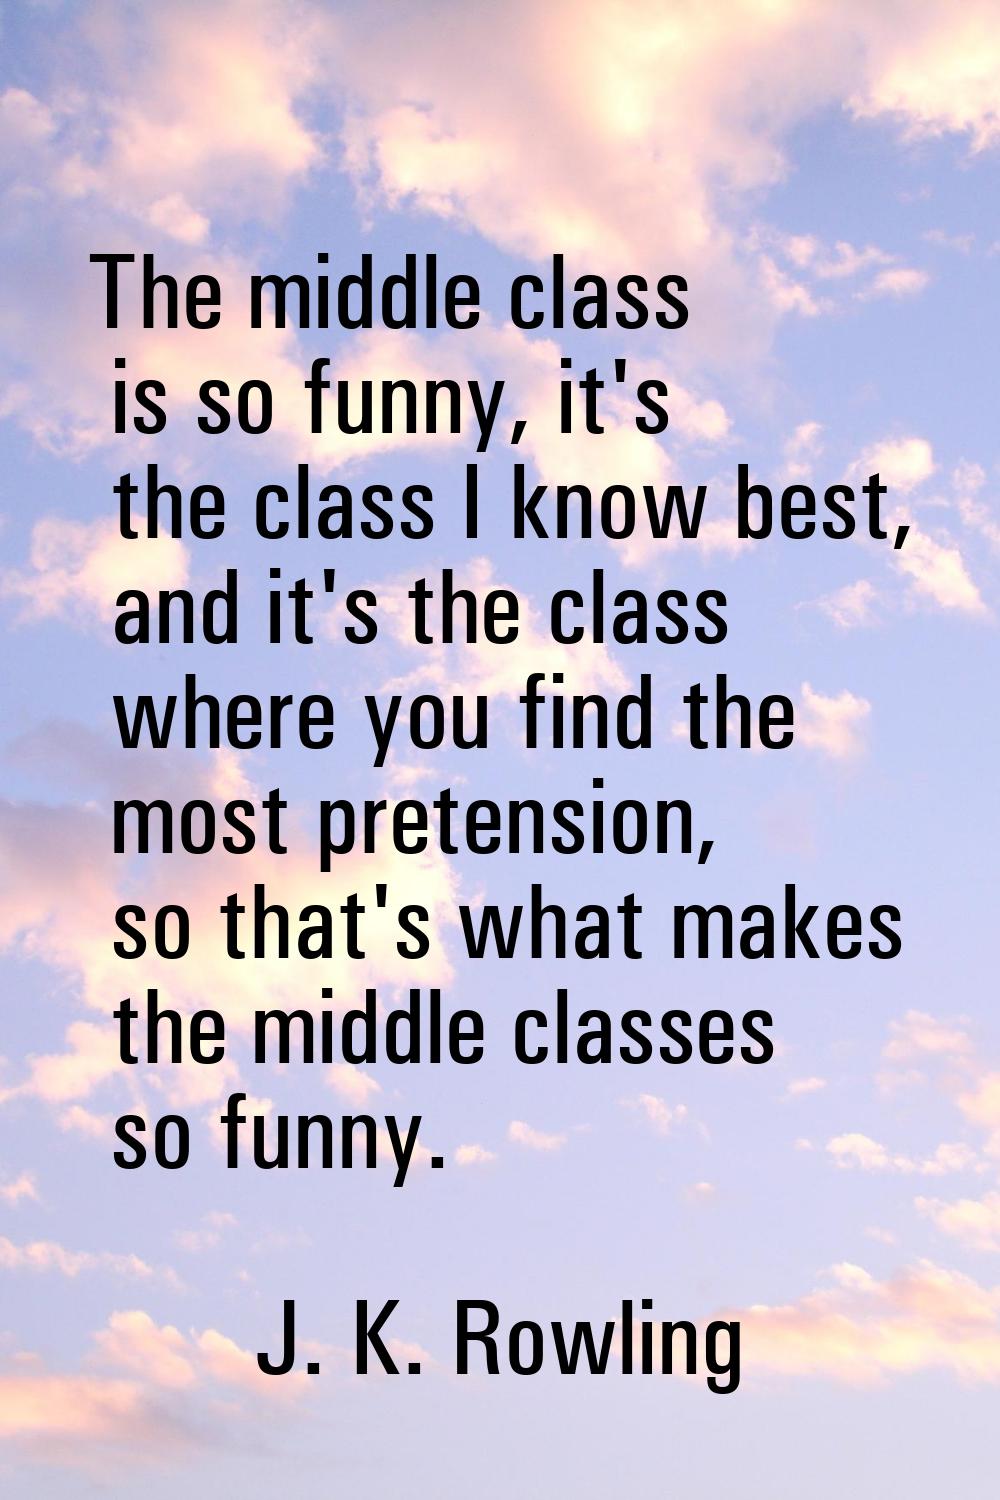 The middle class is so funny, it's the class I know best, and it's the class where you find the mos